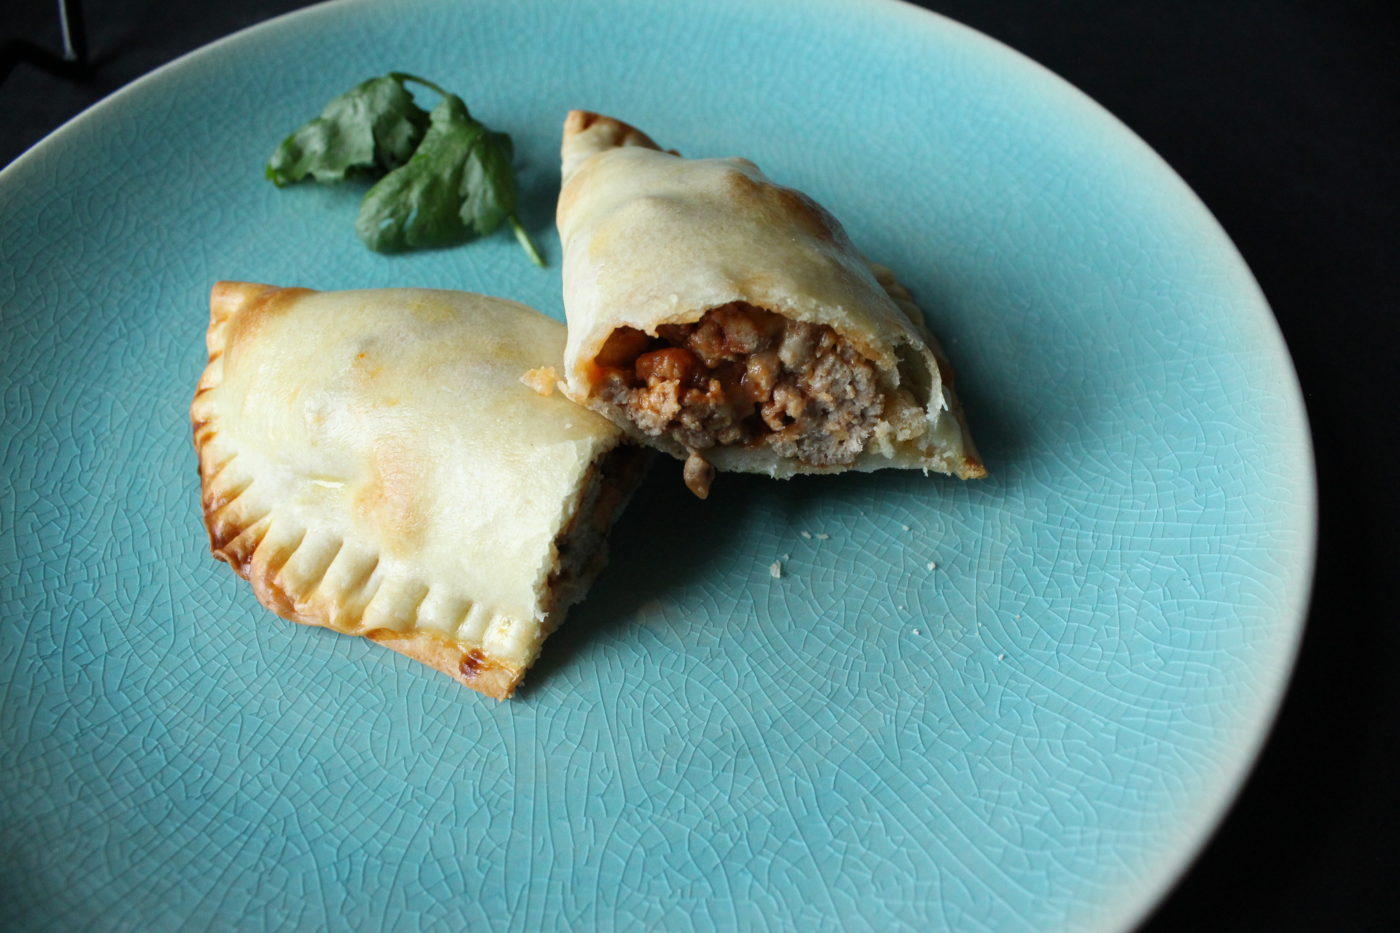 Empanadas are a delicious comfort food. Here's how to make easy empanadas without a 'real' recipe.